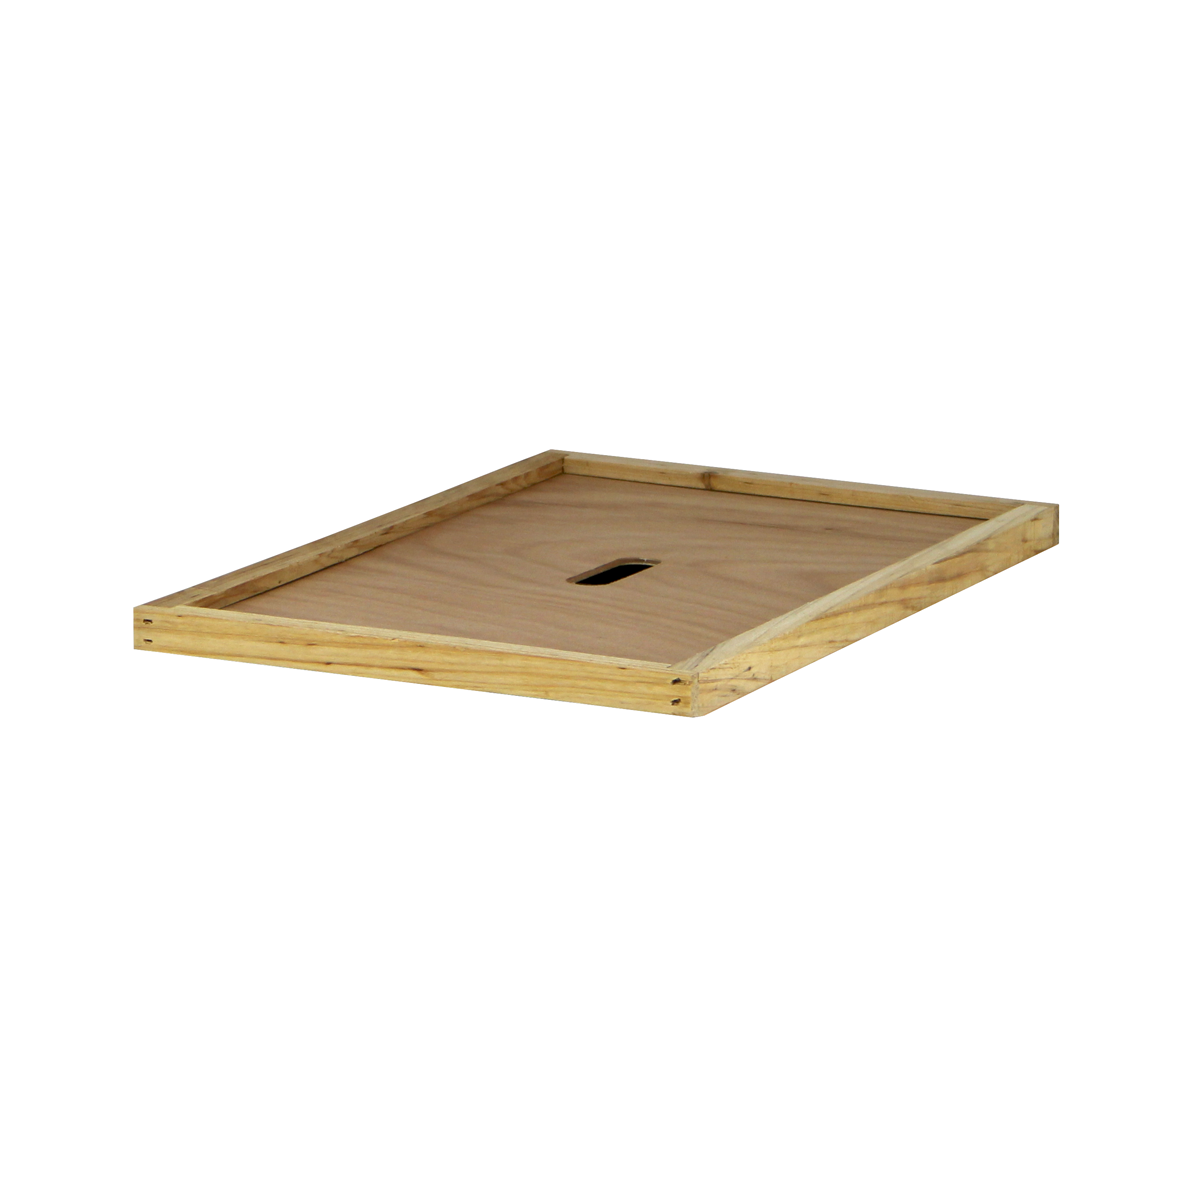 Hoover Hives Wax Coated 8 Frame Inner Cover With Oval Center Cut Out